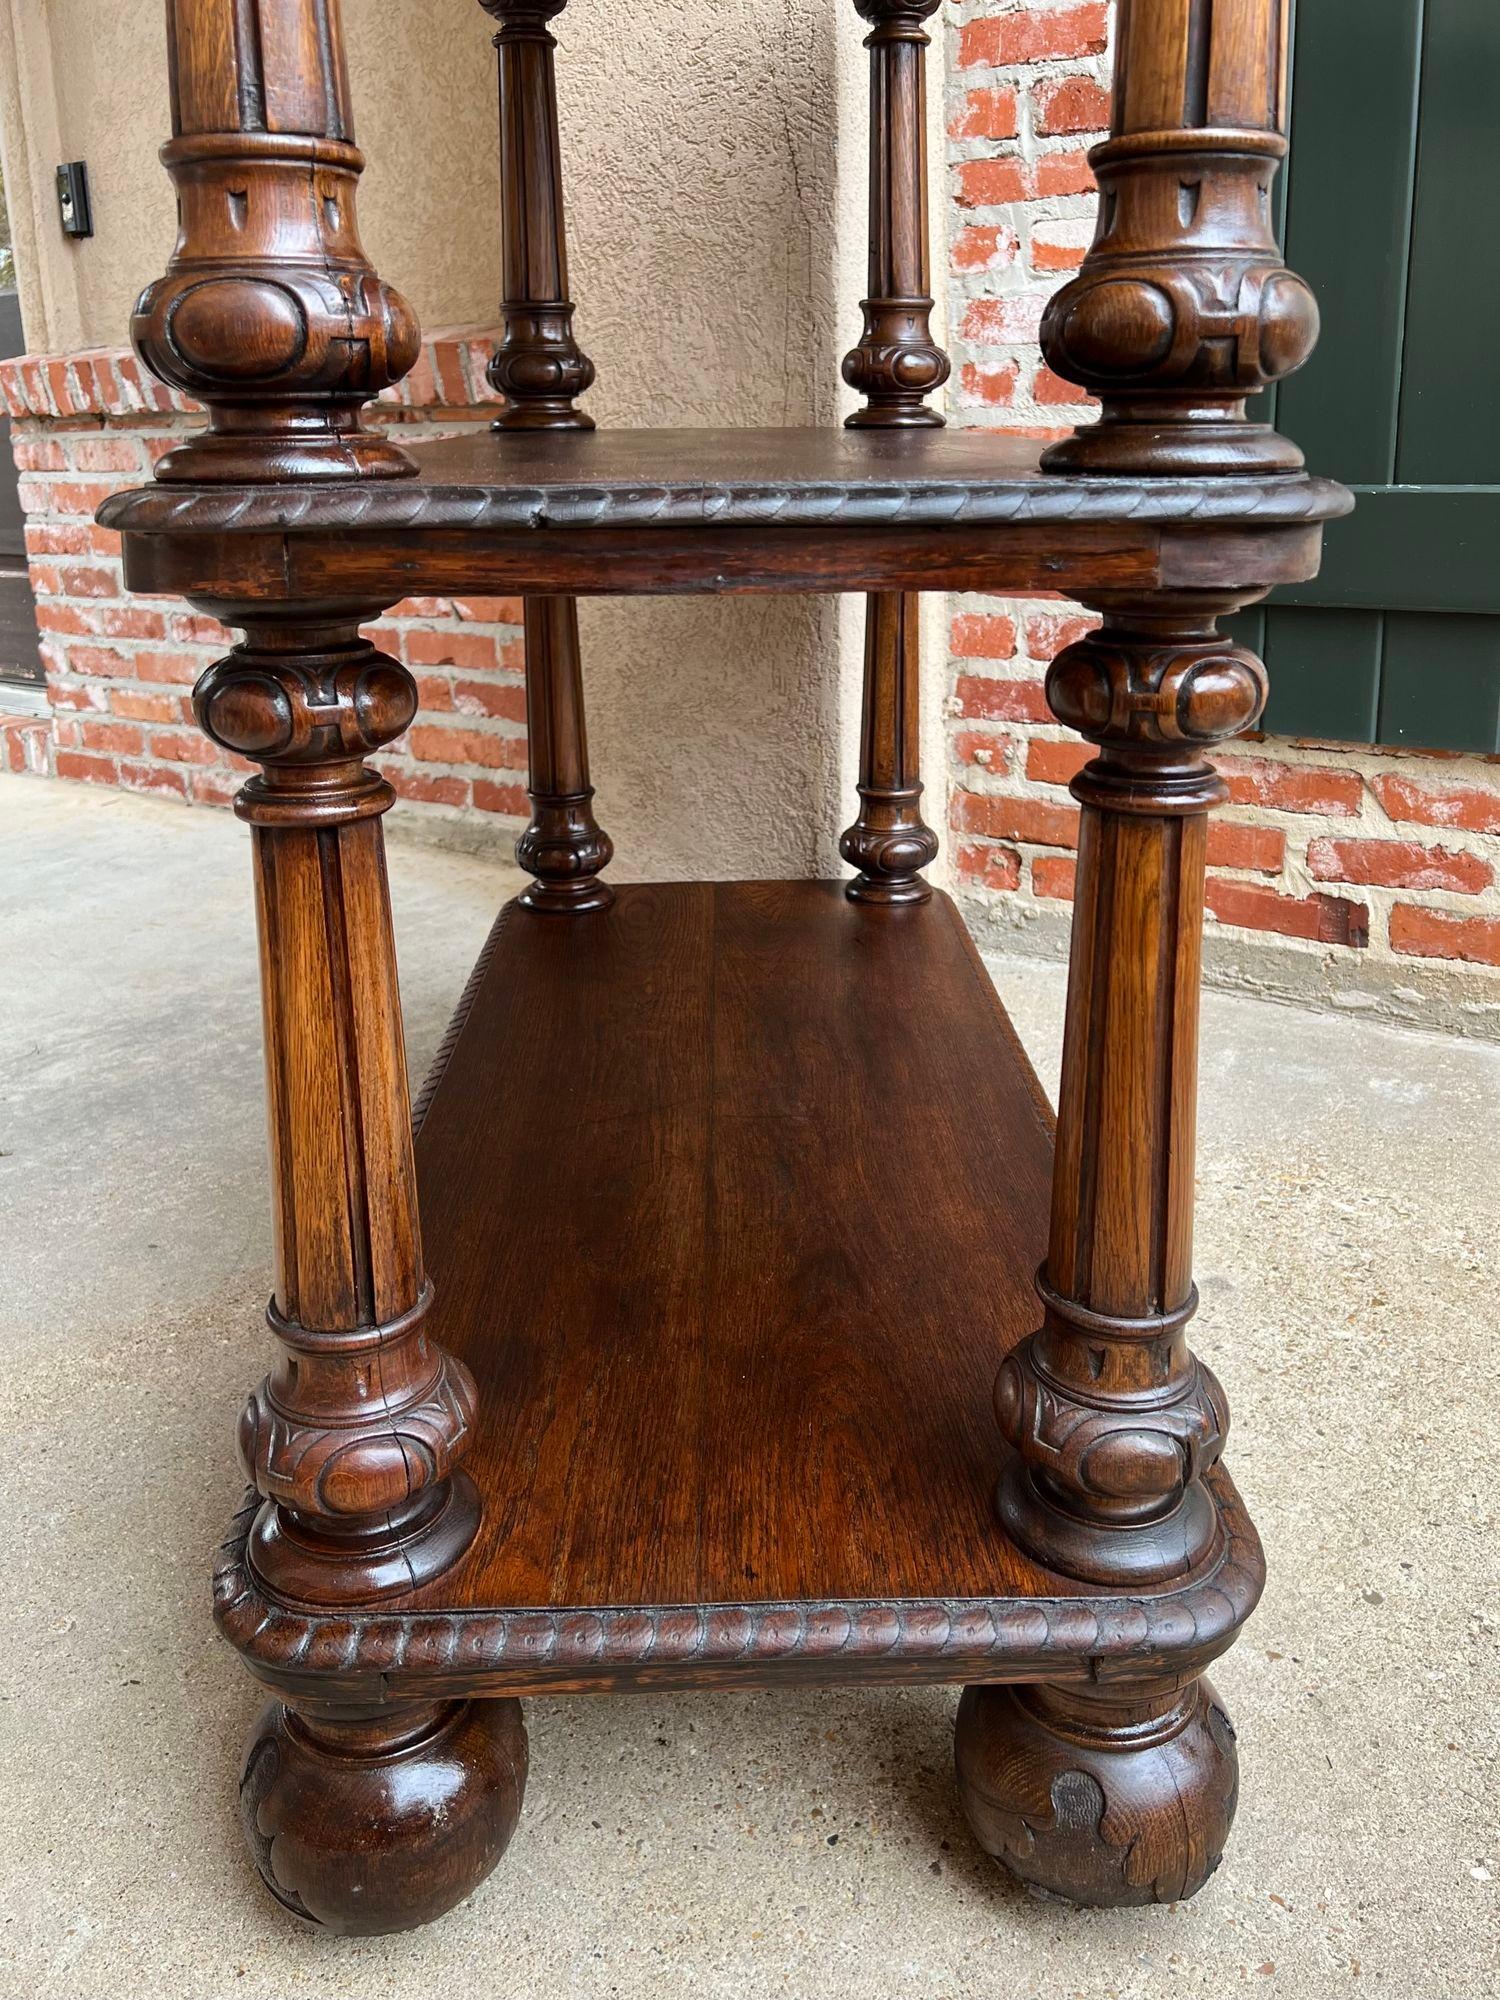 Antique English hotel dumbwaiter server cart sideboard carved oak display shelf.

 Direct from England, a fabulous and quite rare antique hotel server or dumbwaiter. Oversized and quite majestic, almost 4 ft. tall and 4 ft. length, the server has